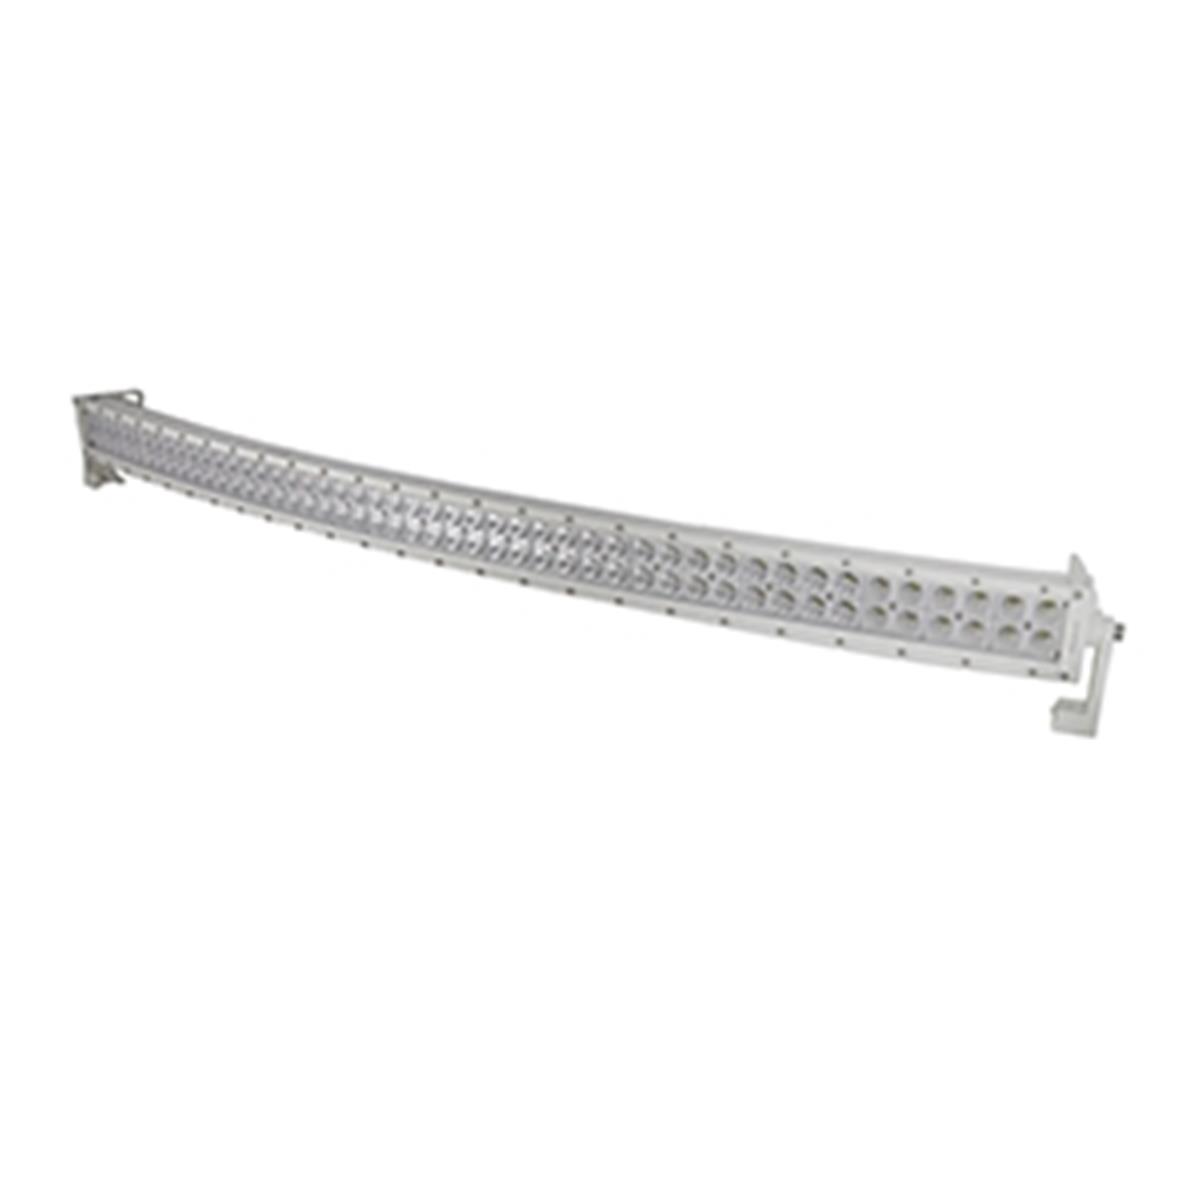 He-mdrc42 Dual Row Marine Curved Led Light Bar - 42 In.